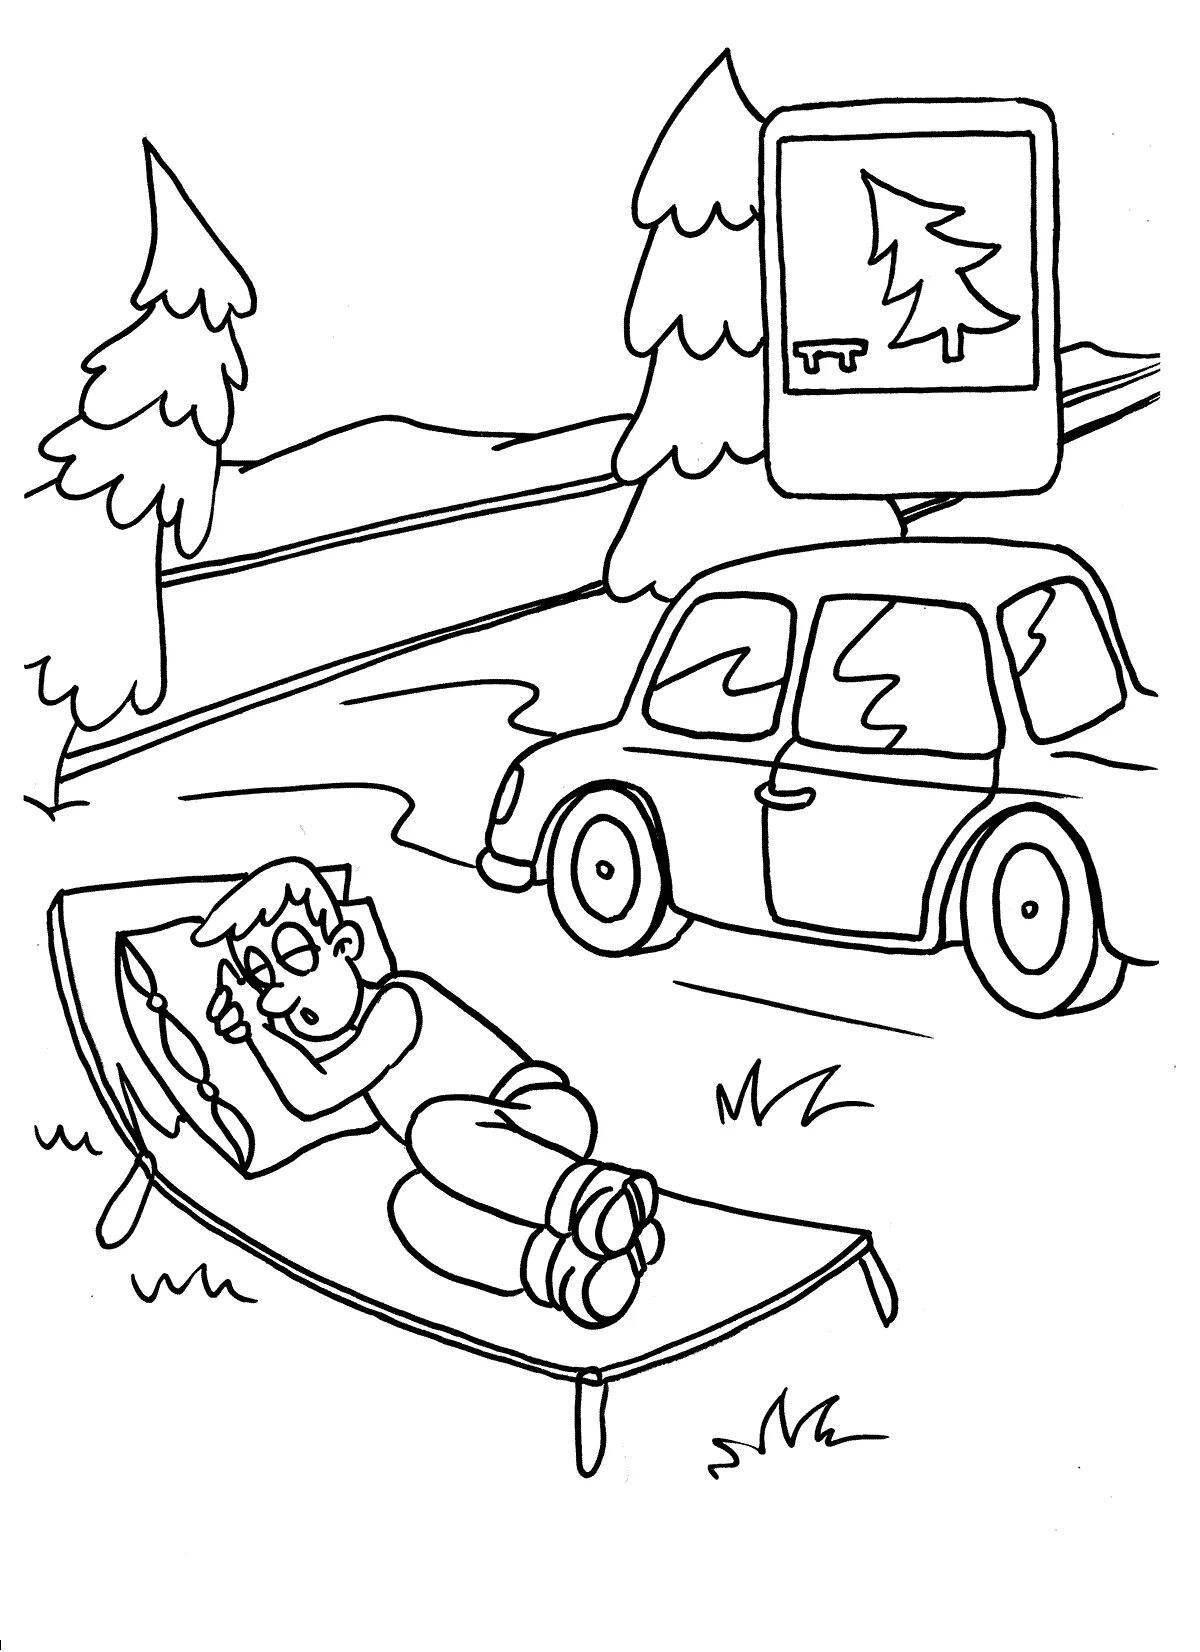 Adorable winter safety rules coloring book